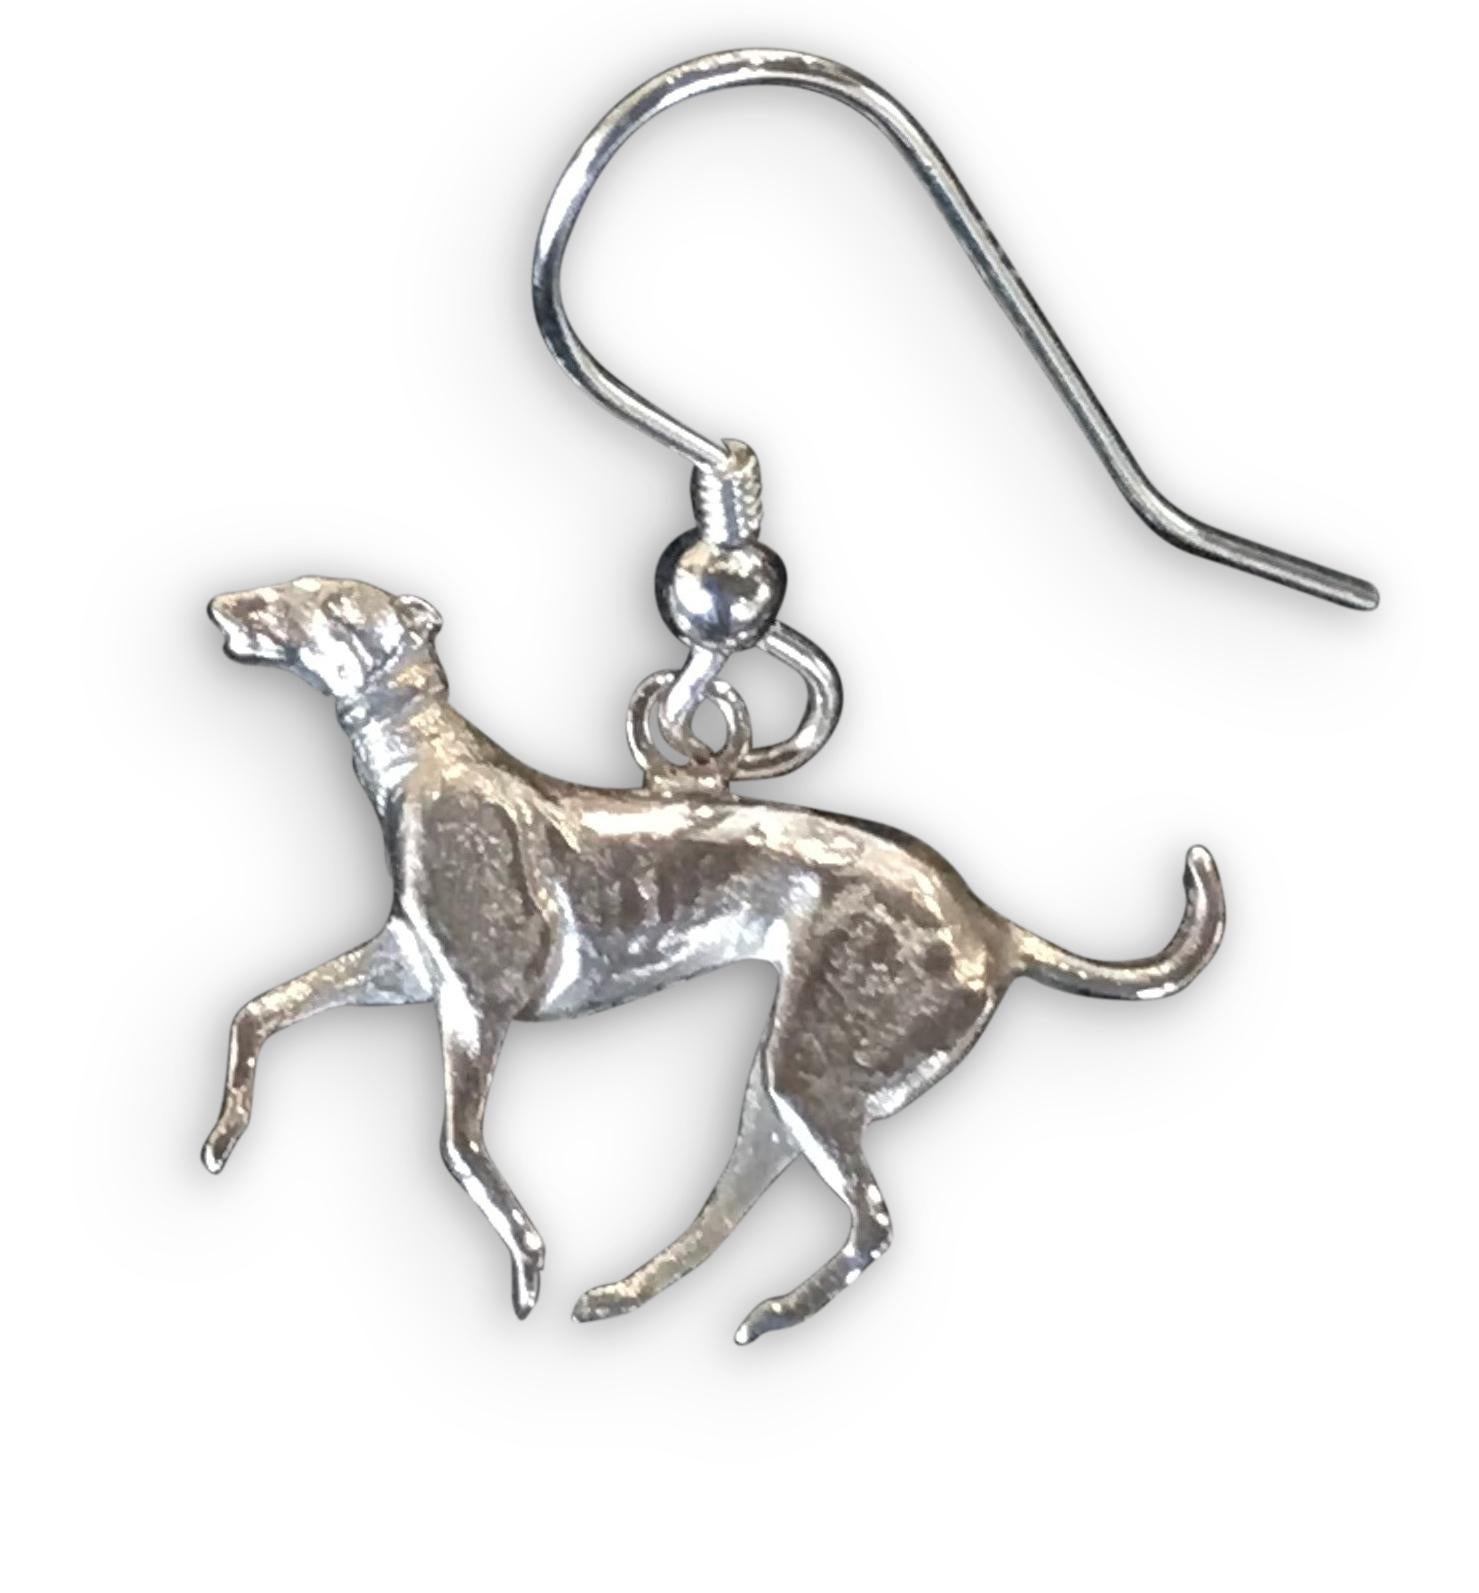 Discover the exquisite art of England’s renowned miniature wildlife sculptor, PAUL EATON, with his bespoke Greyhound sterling silver  earrings. Expertly handcrafted, these miniature sculptures depict the grace of a Greyhound. The earrings measure